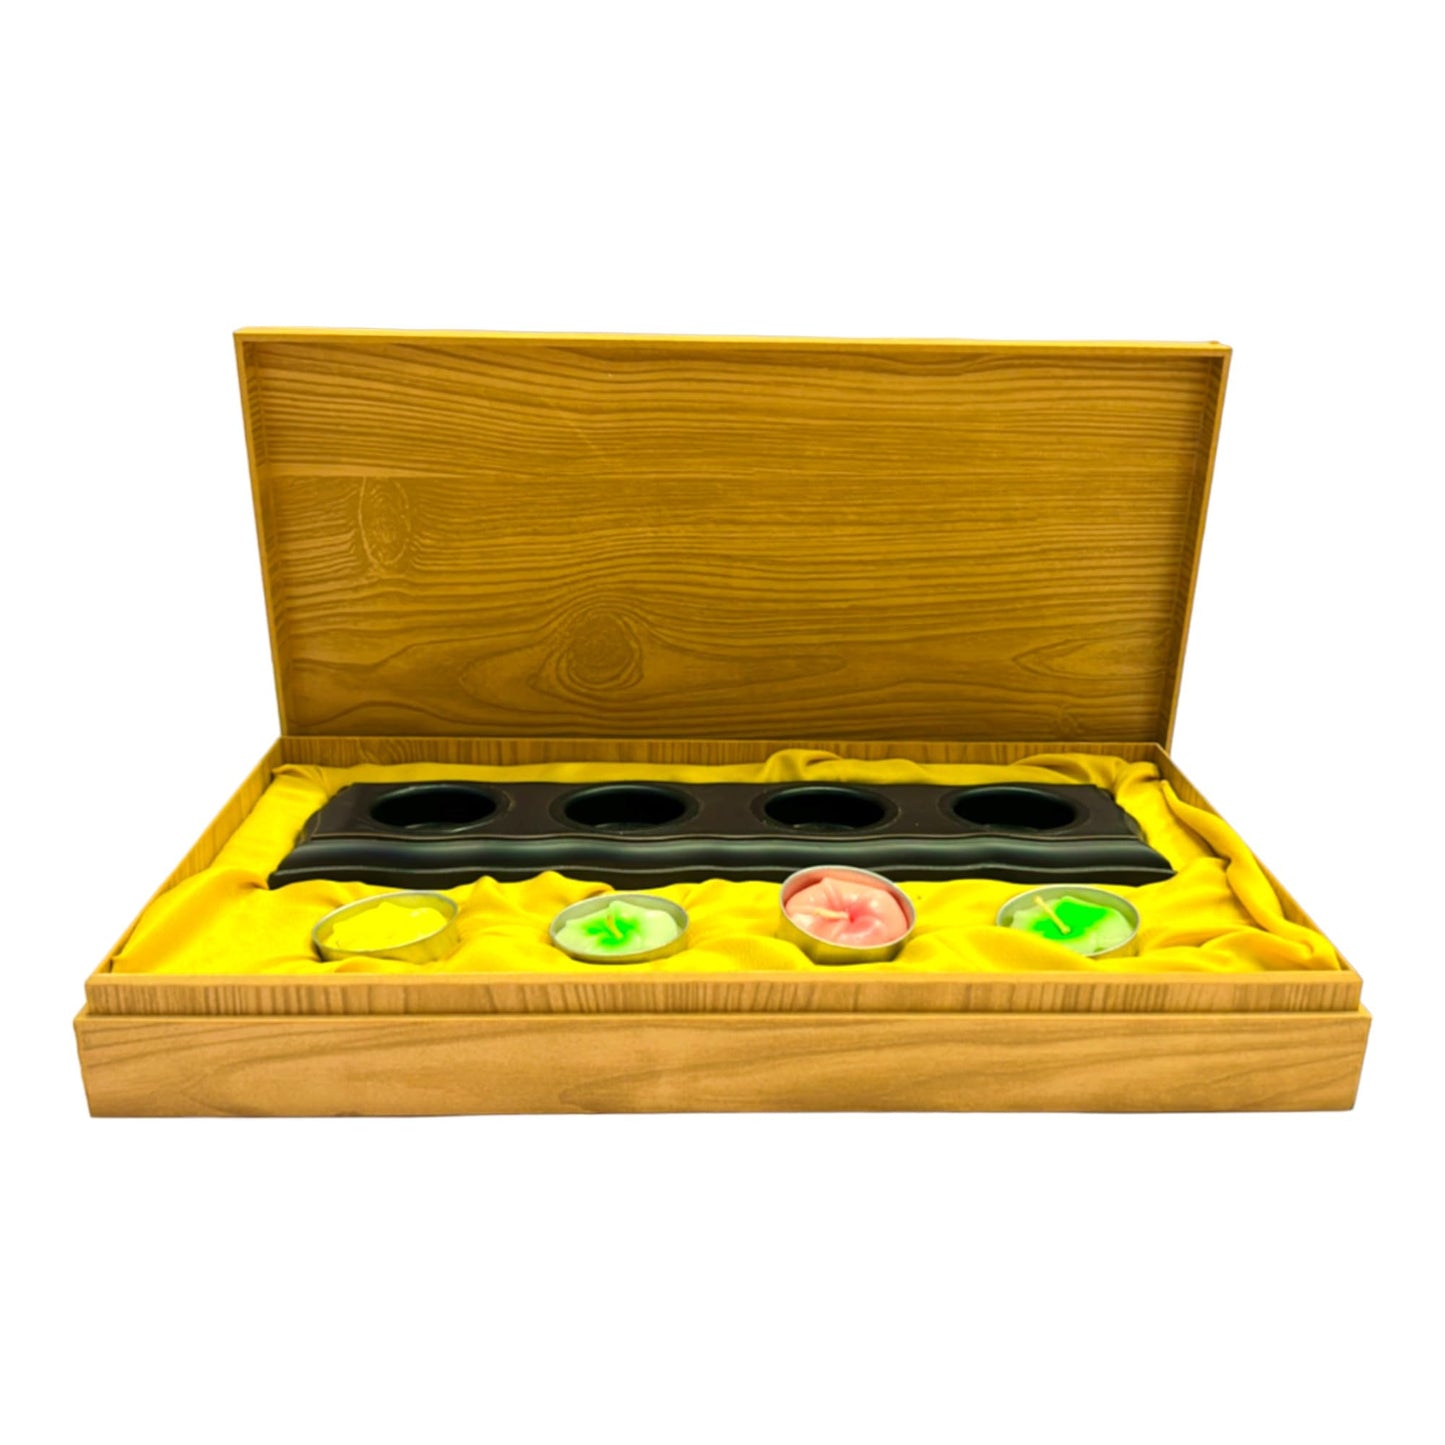 Pujahome Candle Gift Box with Candle Stand in Wooden Box, Perfect for Gifting, Diwali Gift, Tealight Candle Gift Box